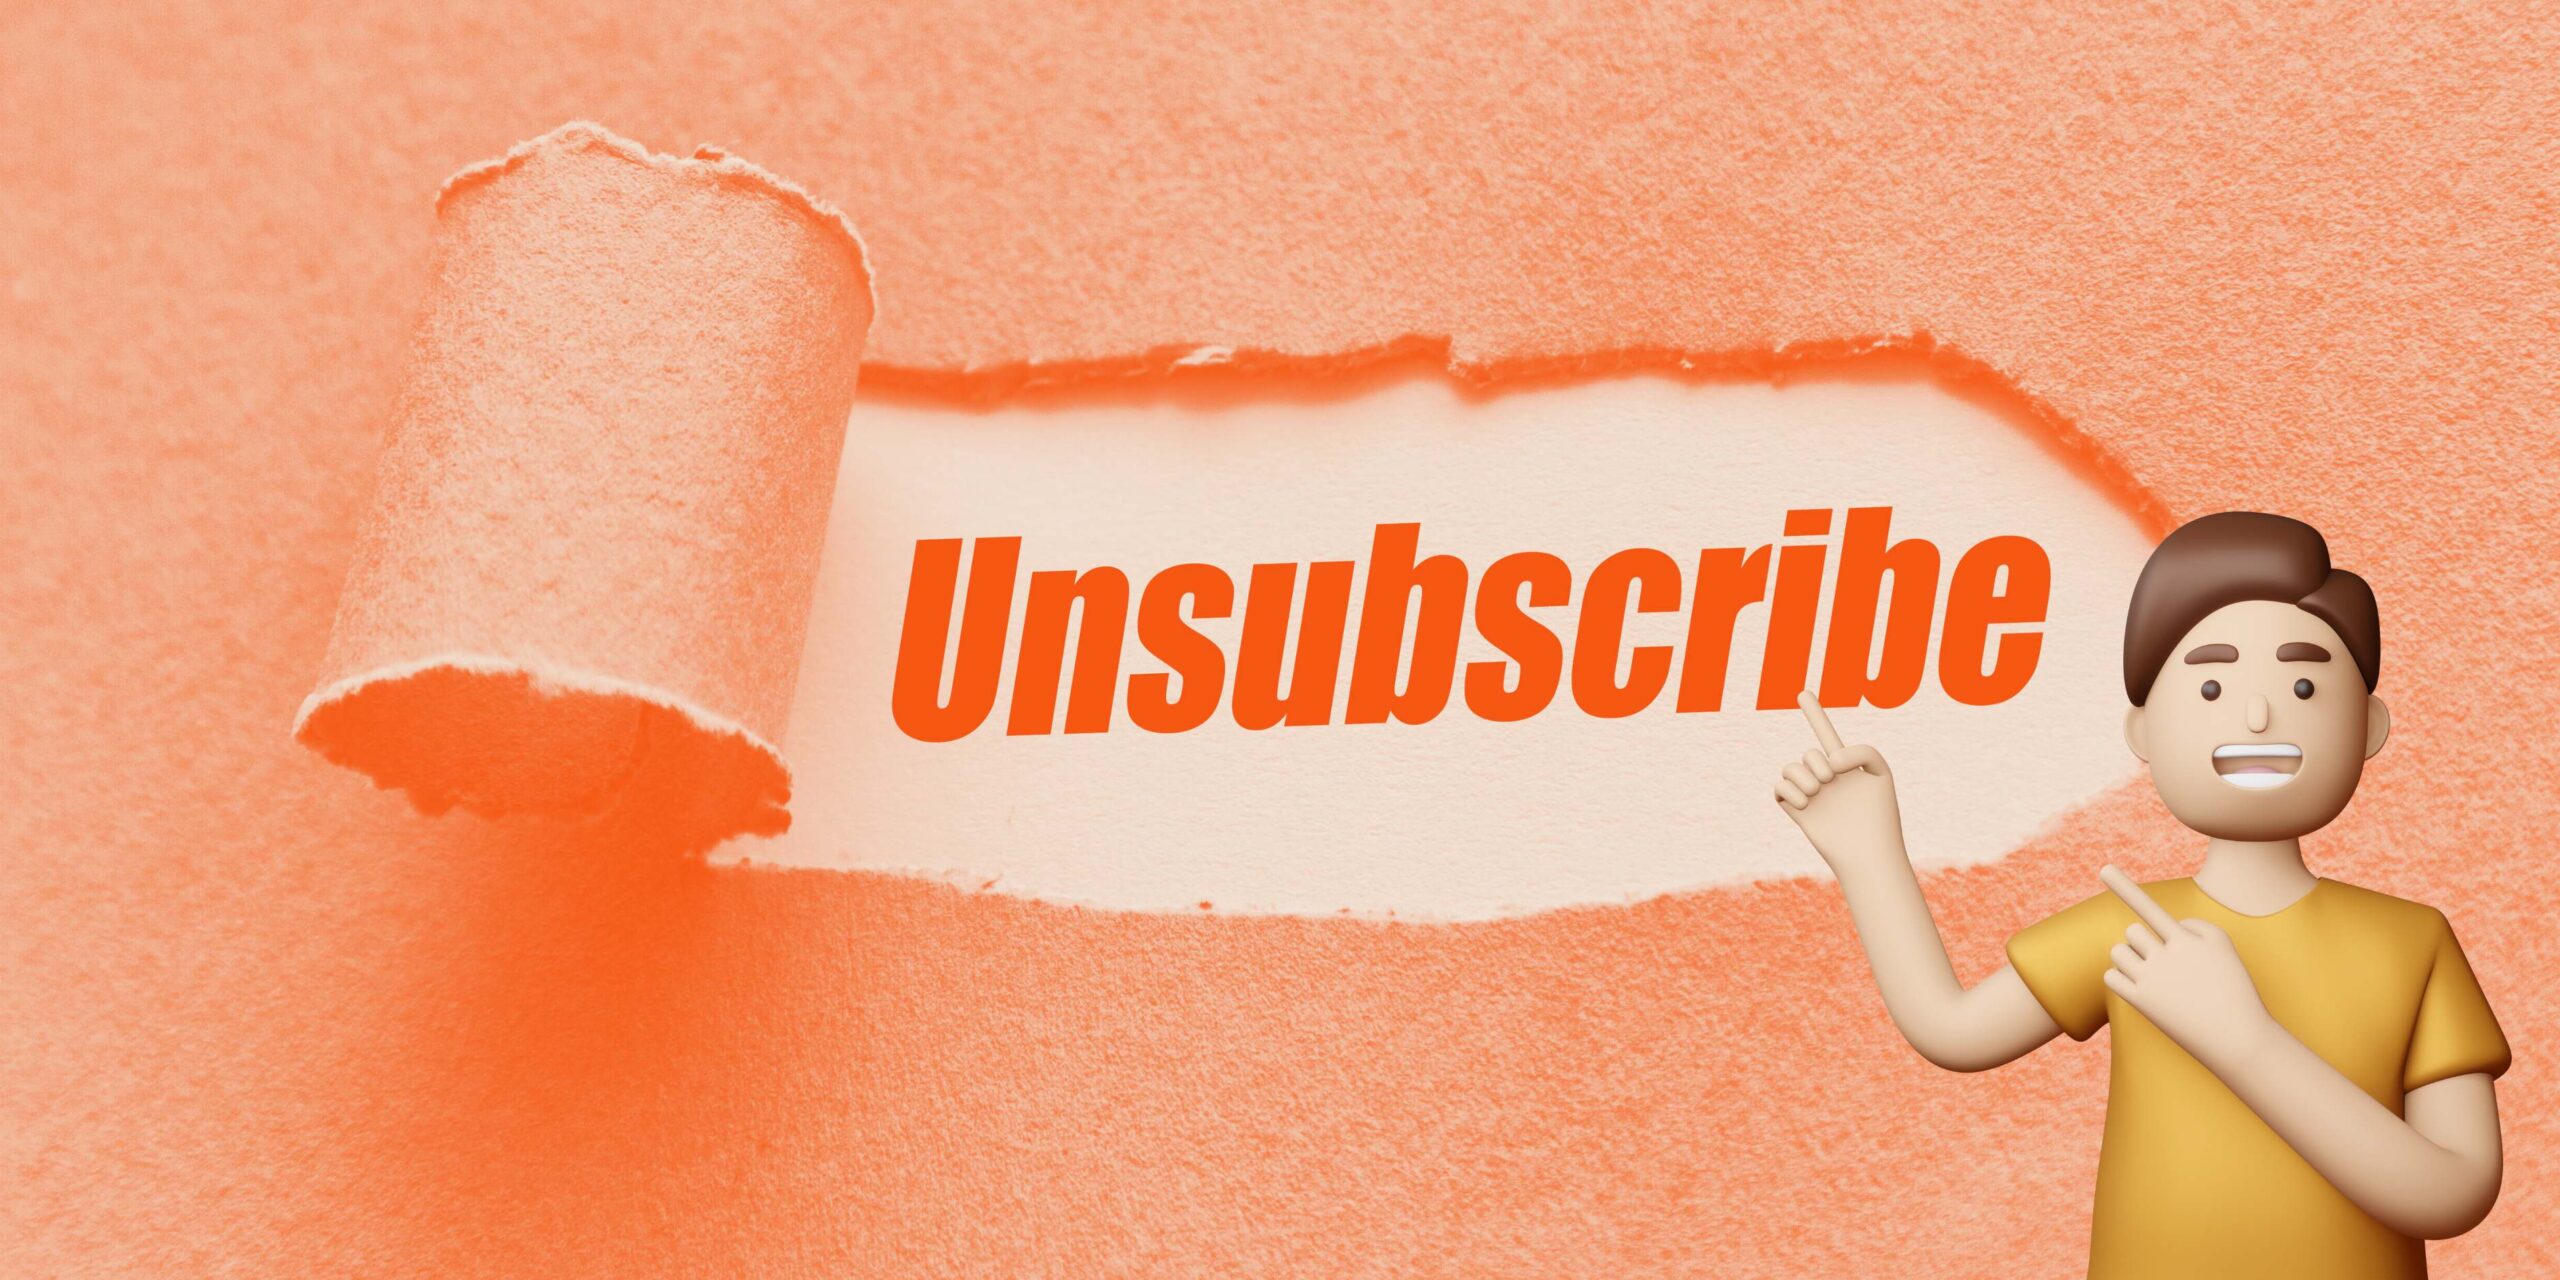 How to Unsubscribe from Unwanted Emails in Outlook